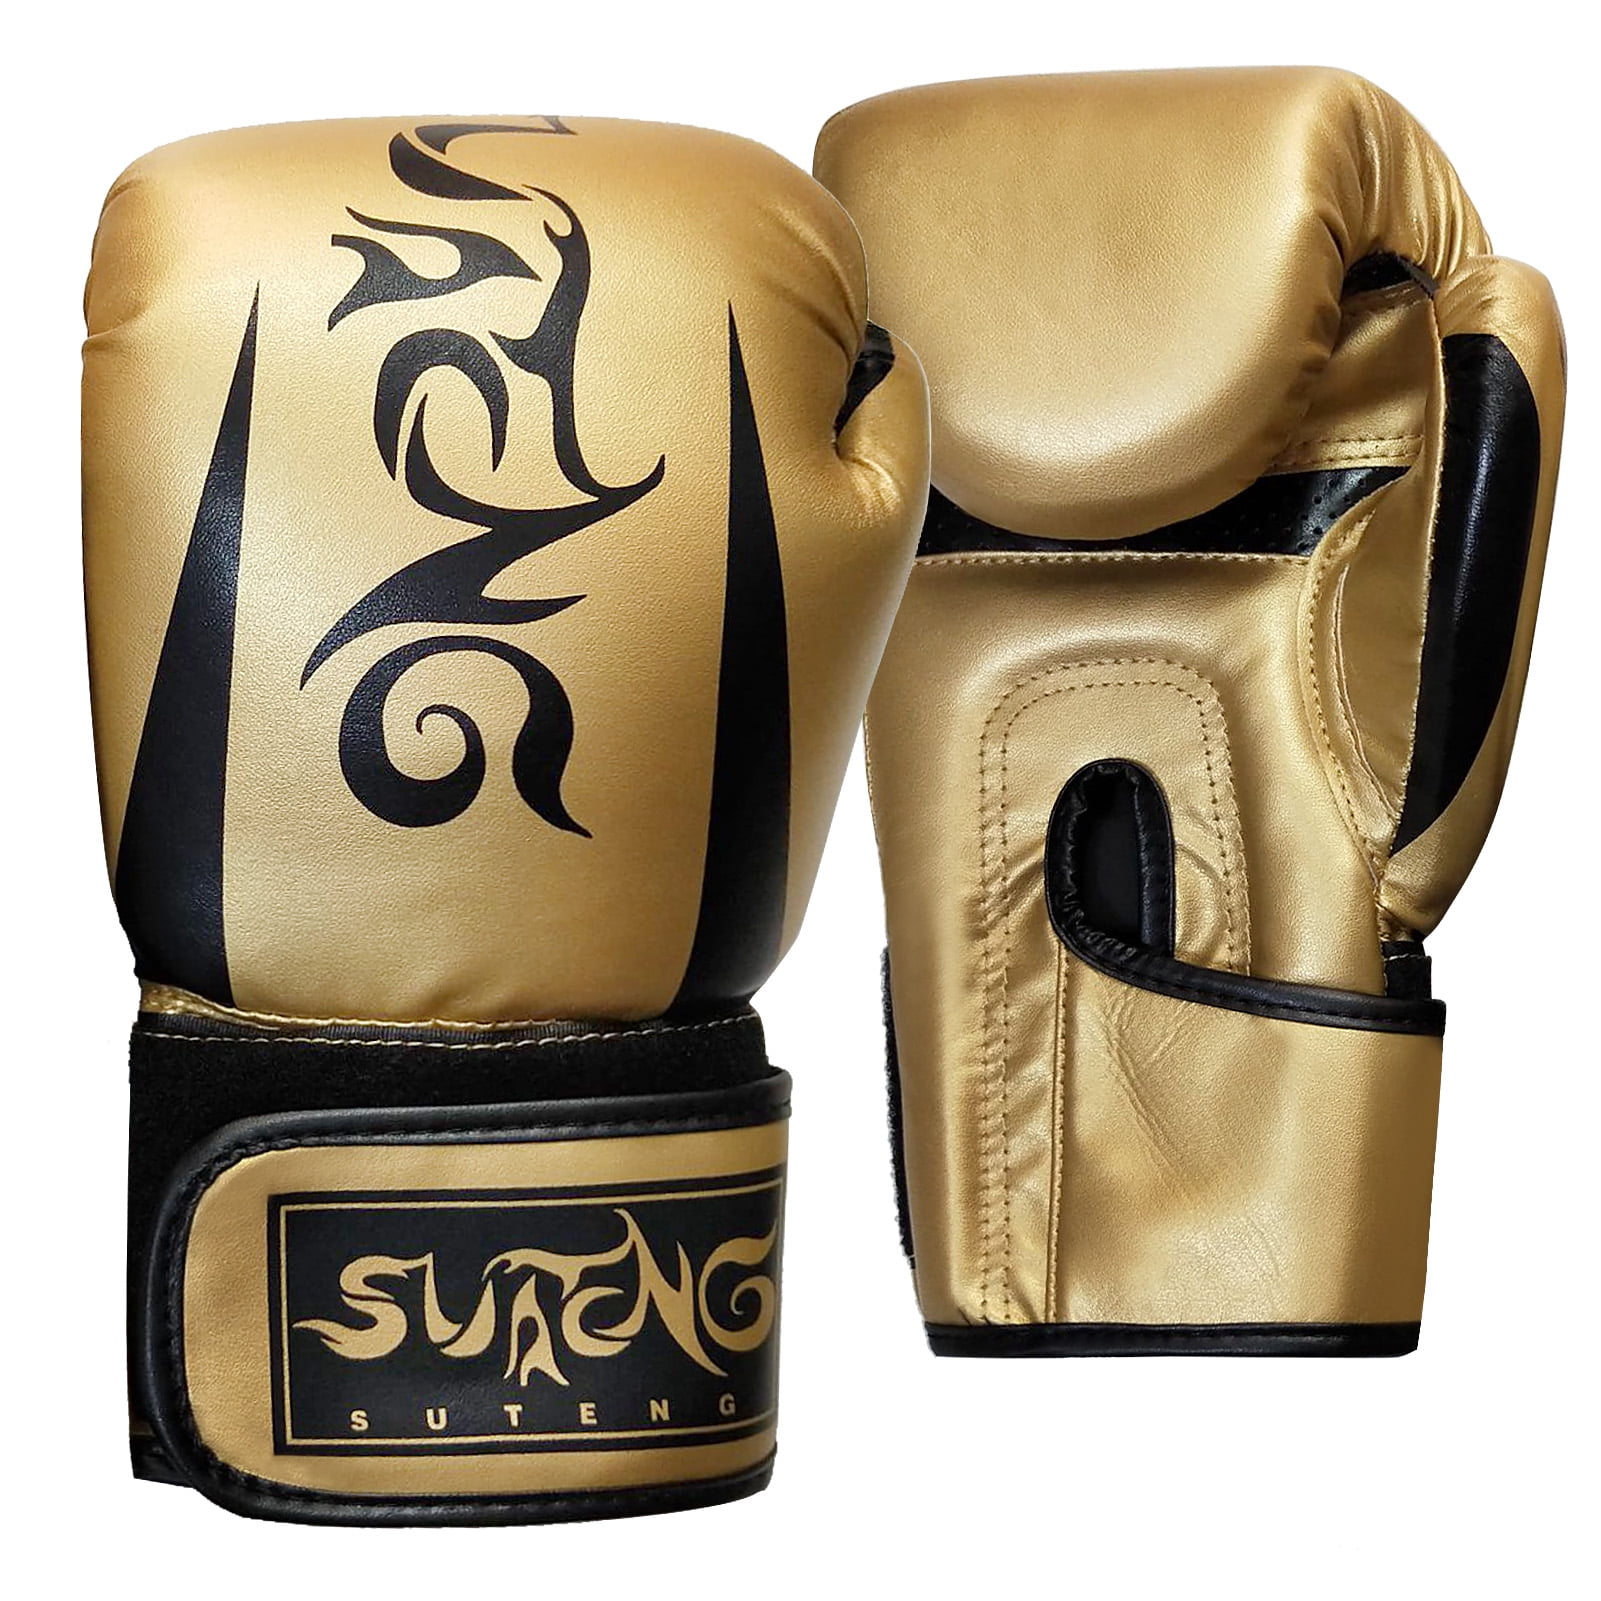 Details about   Boxing Gloves Punching Training Fitness Leathe Boxing Exercise Durable 